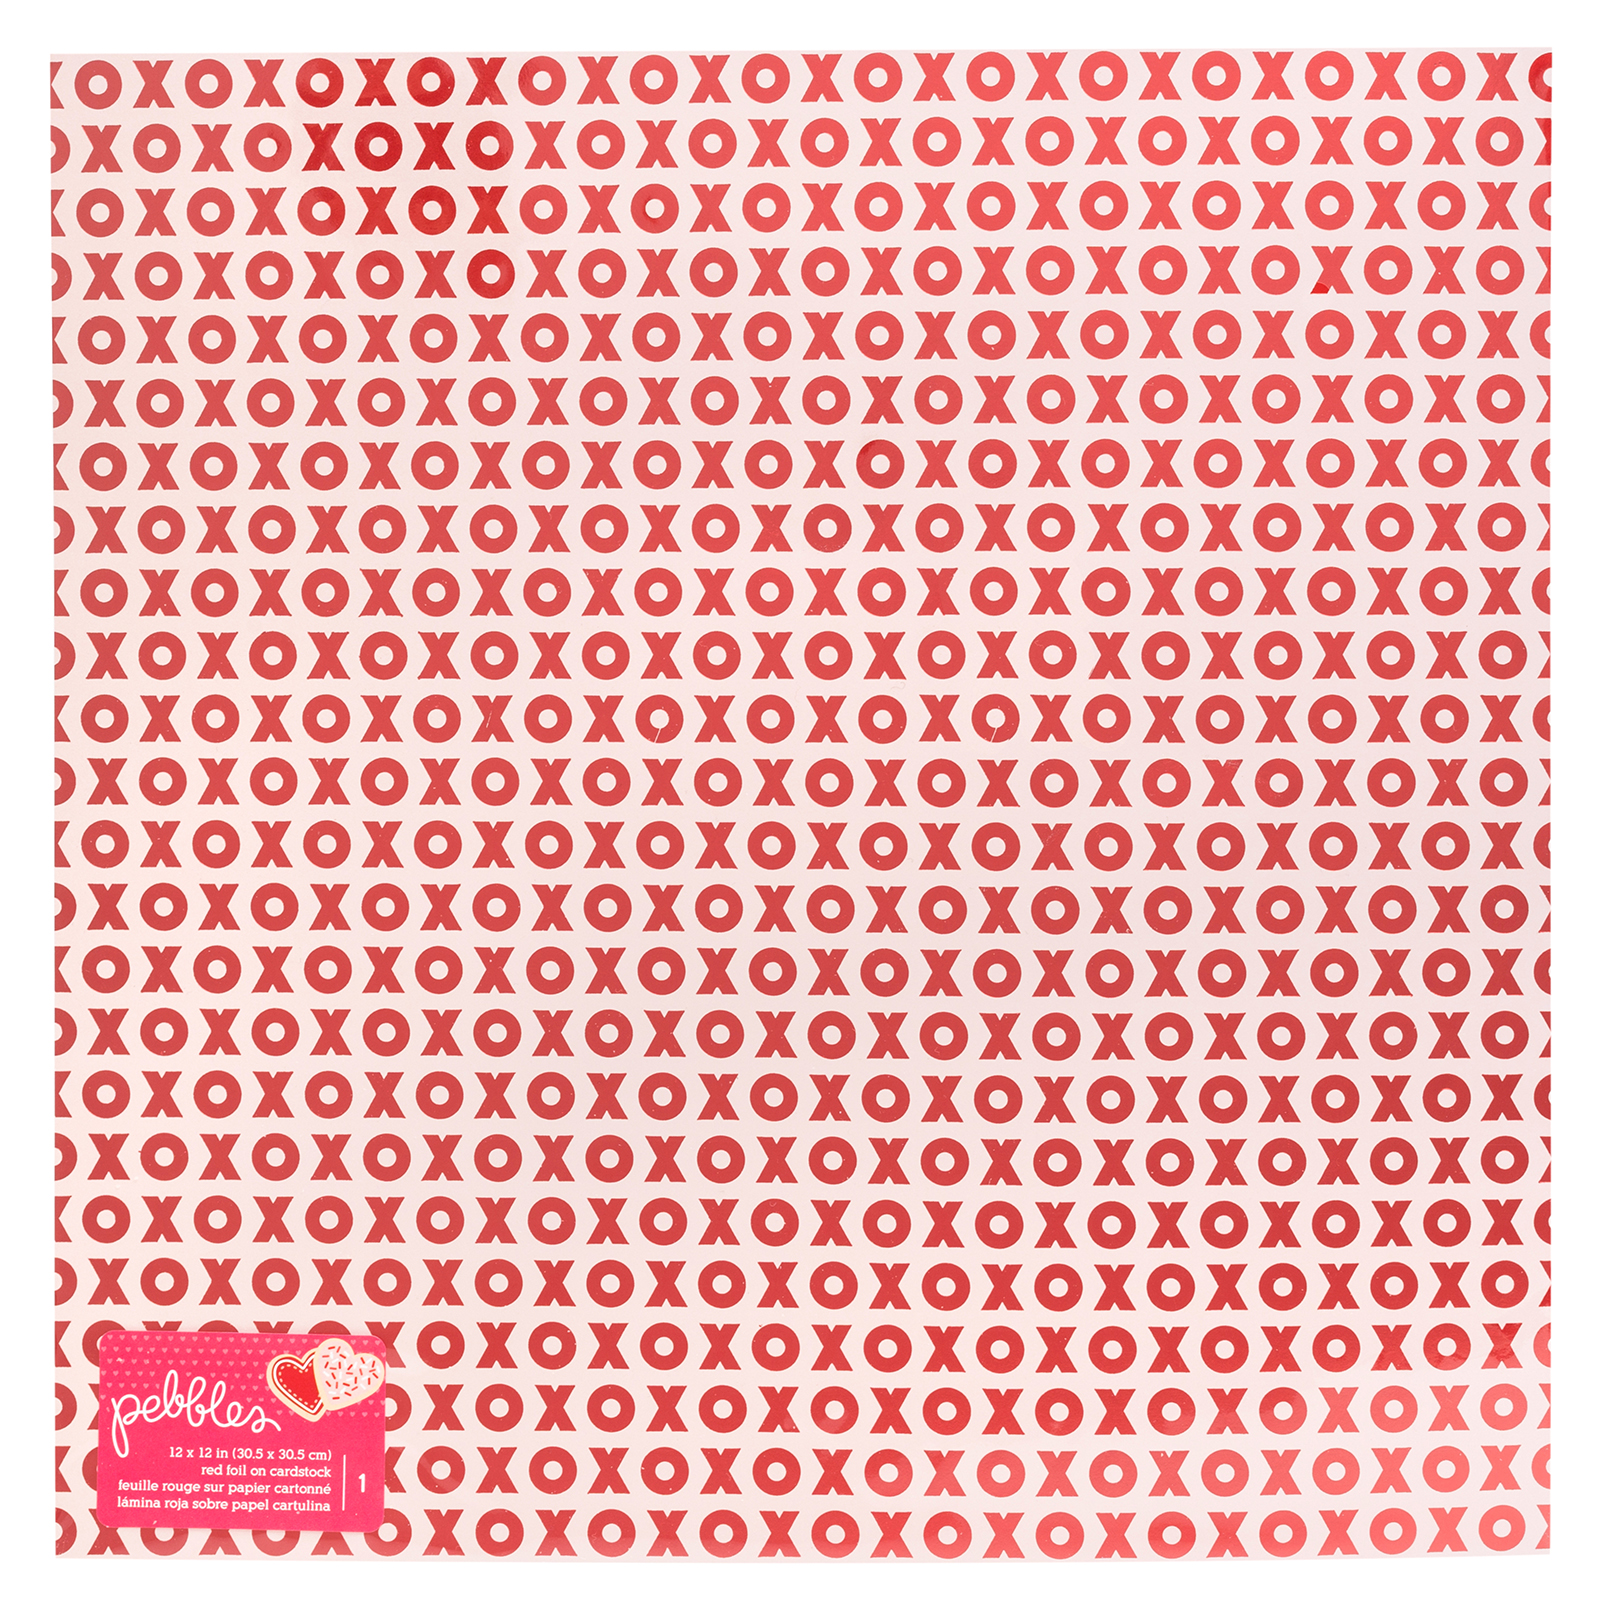 Pebbles • Specialty paper loves me 12x12" Red foil